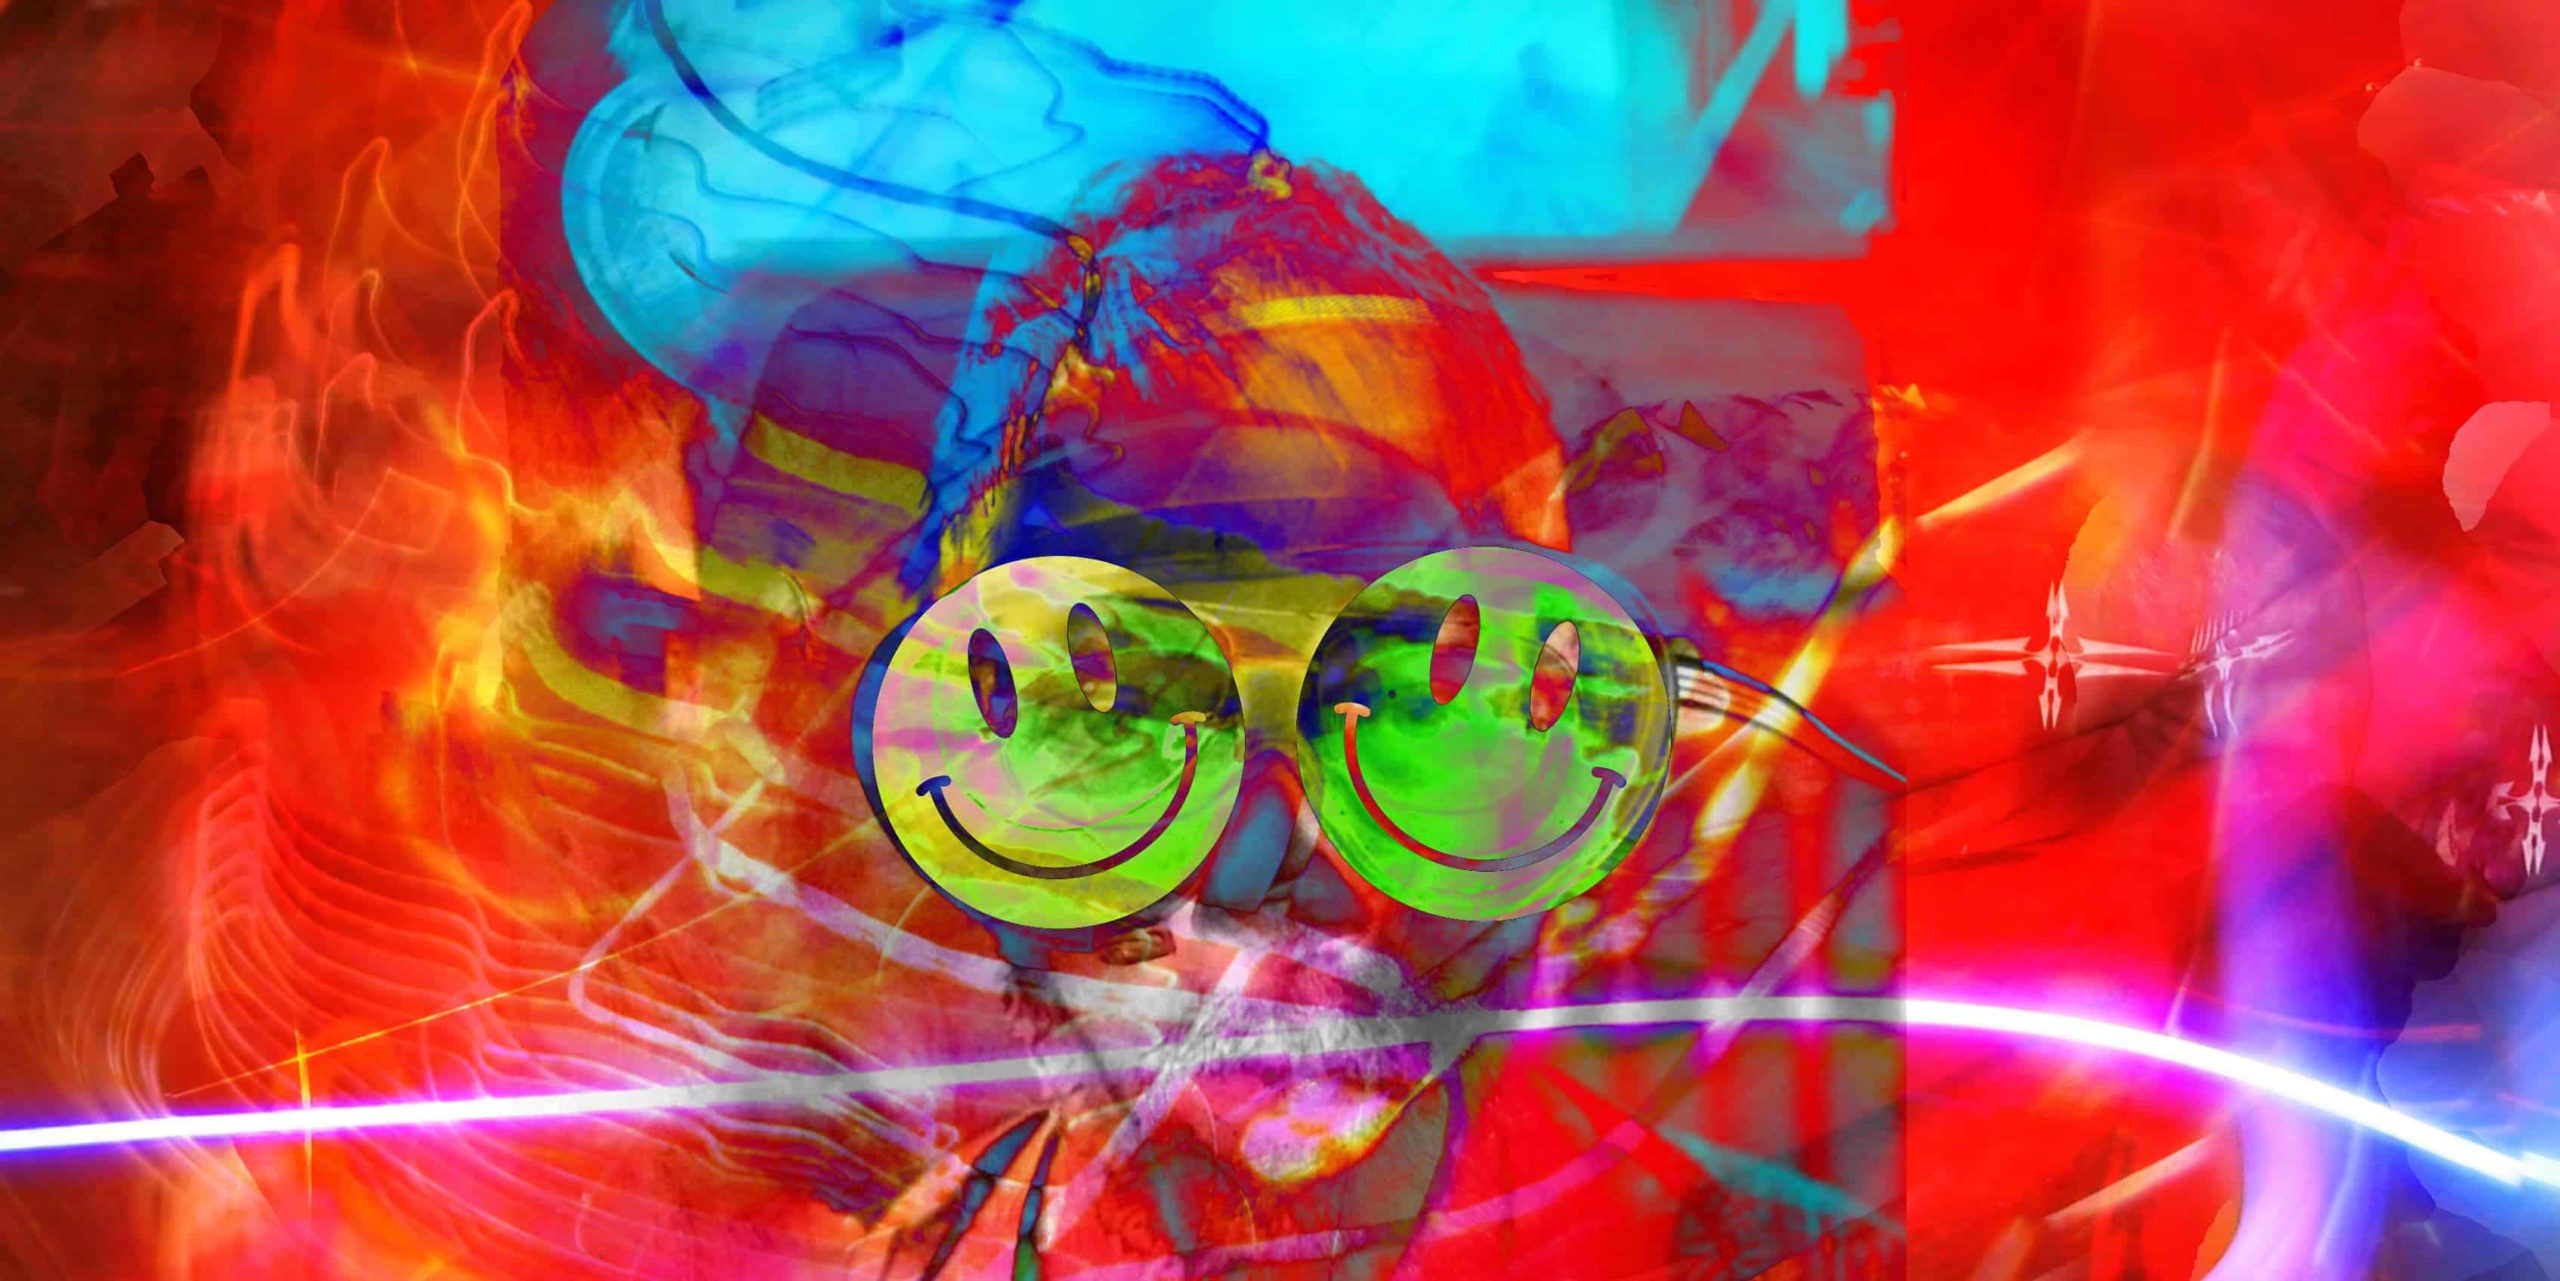 RC 308: Raving I’m Raving  acid house and rave mix podcast, cover art is two smileys over an old photo of me in goggles very psychedelic